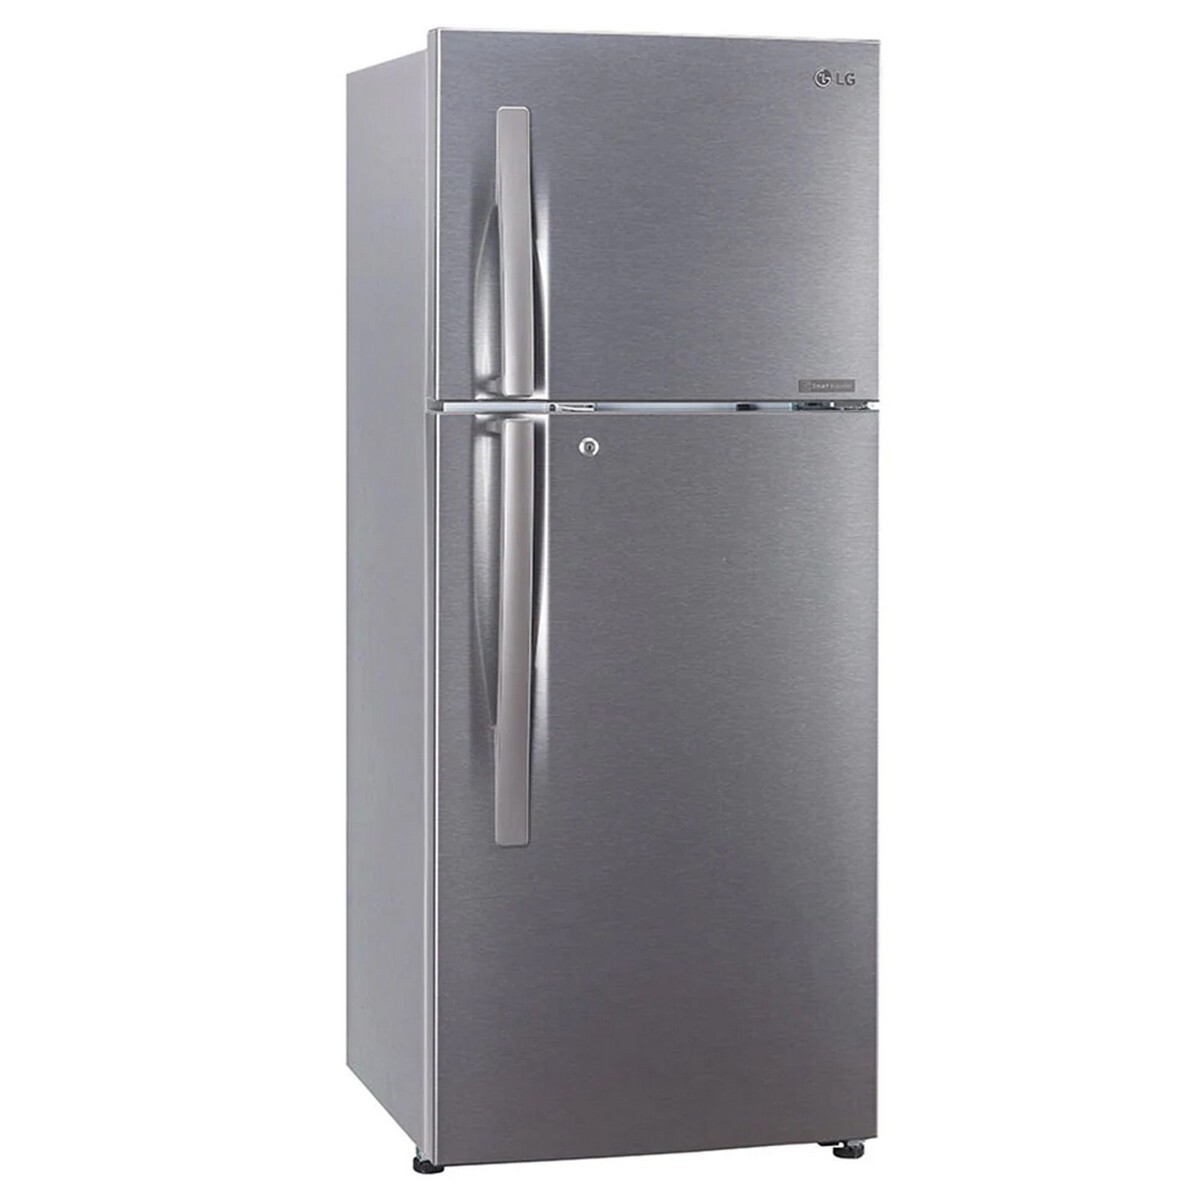 LG Frost Free Double Door Refrigerator GL-S292RDSY 260 Ltr